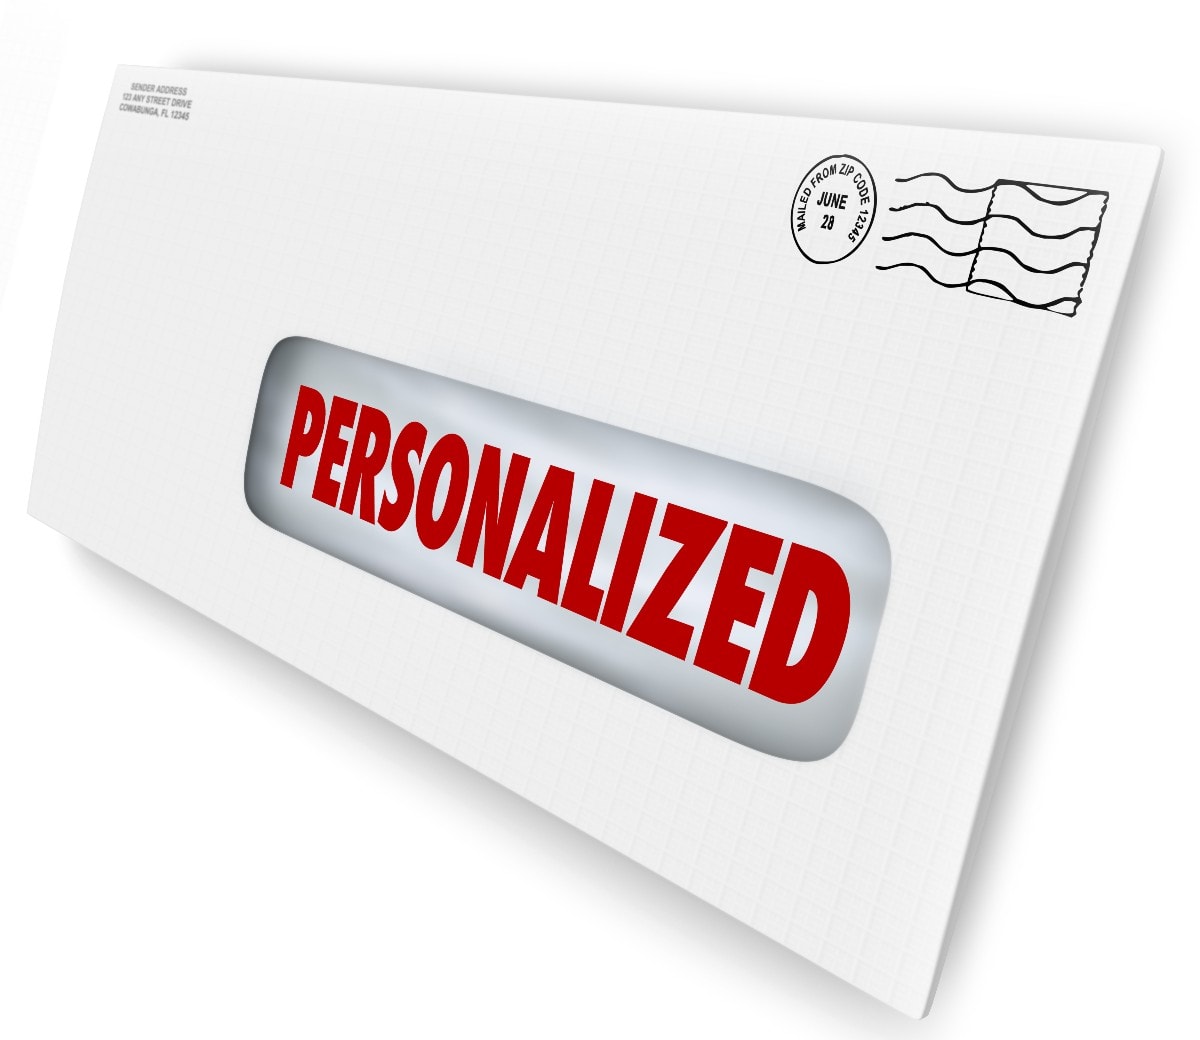 How to increase donations personalized envelope web 1